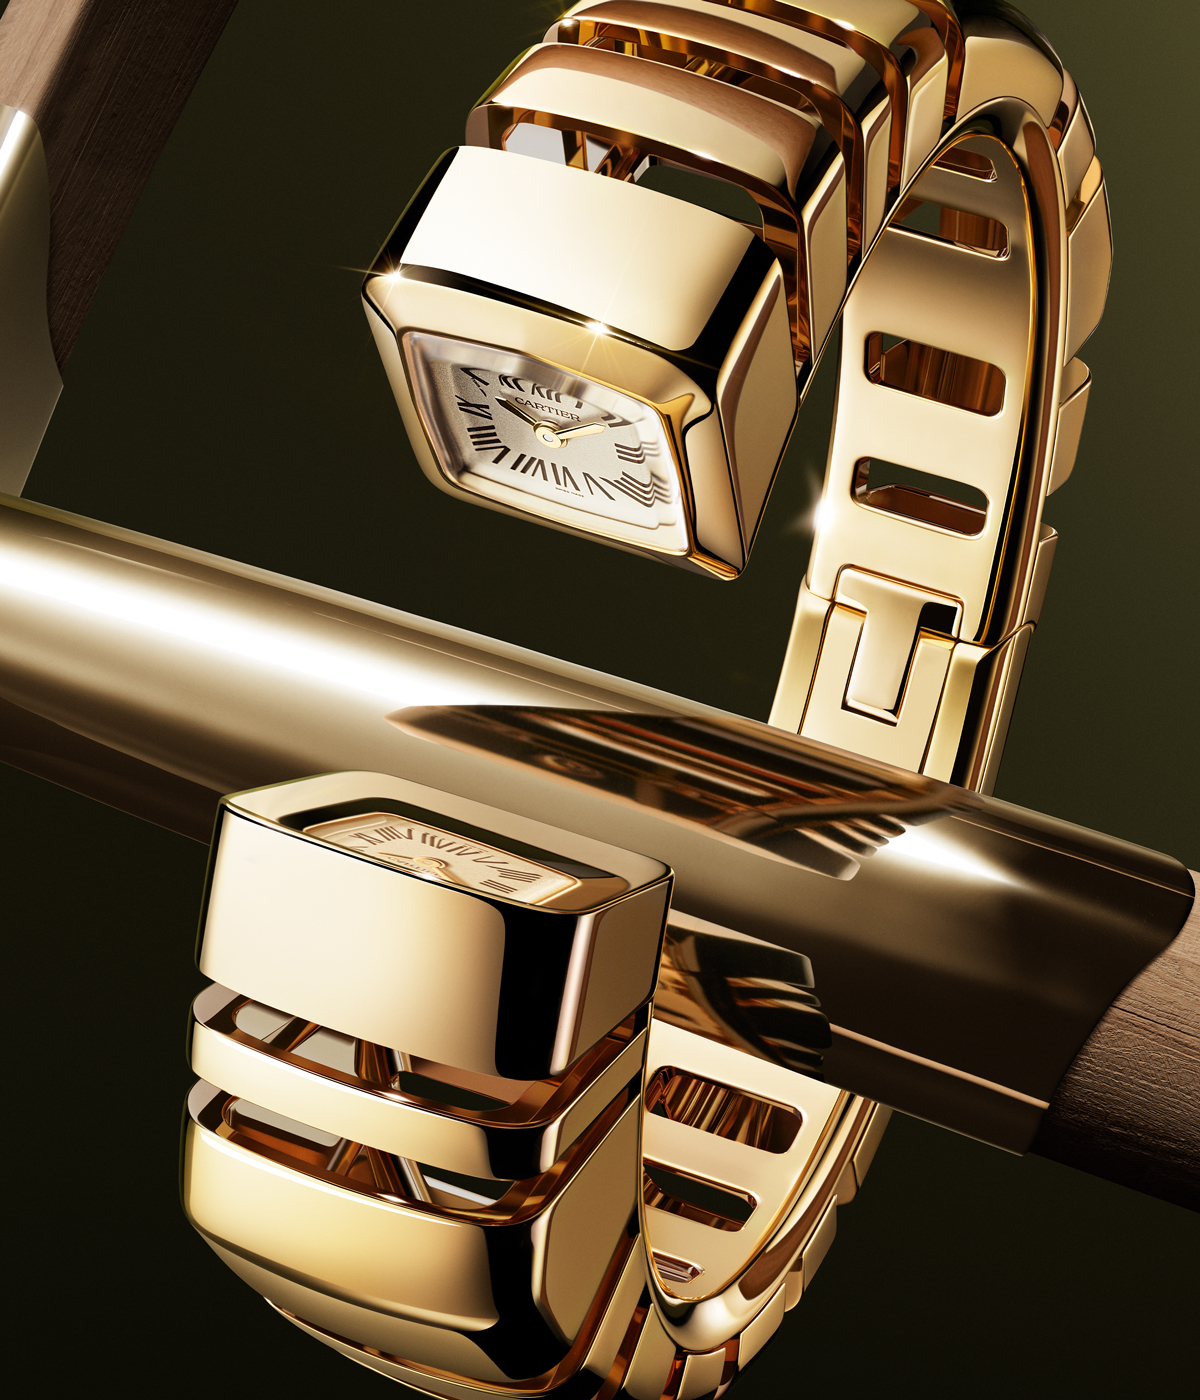 Gold watch with watch face set inside ends of bangle